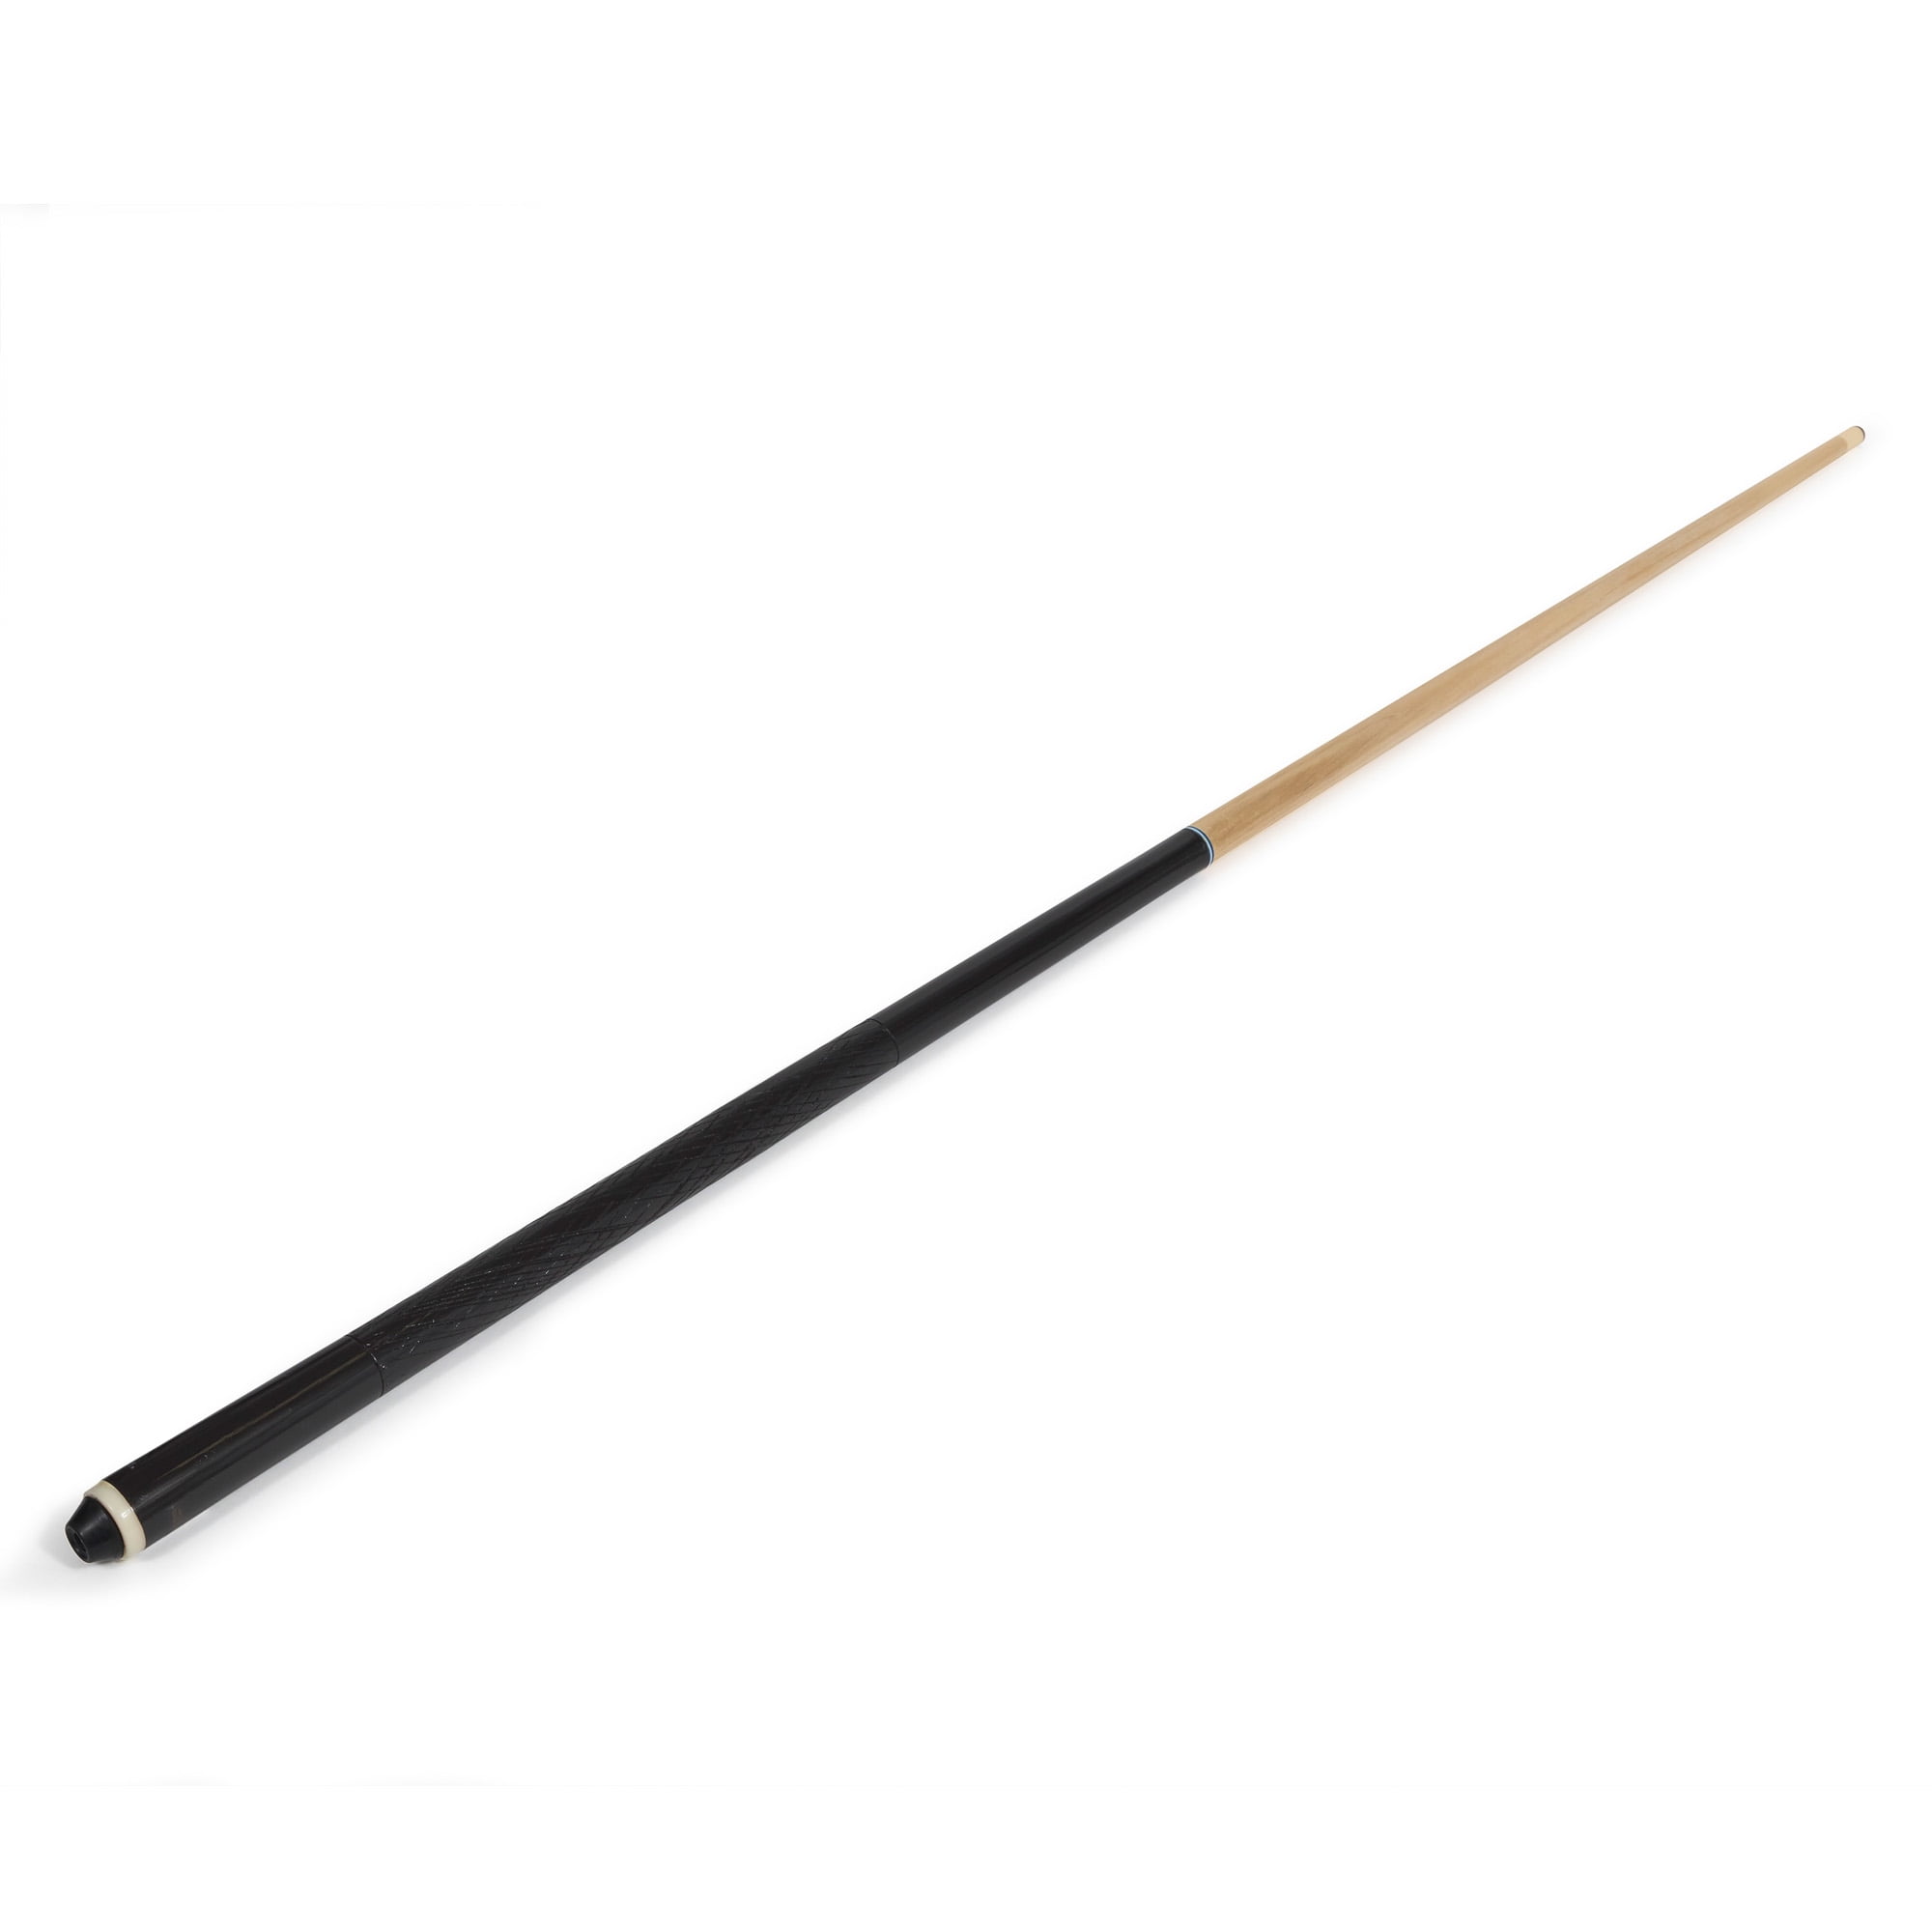 Classic Sport 48" Shorty 1 Piece 16oz Wood Cue; Black and Wood Cue